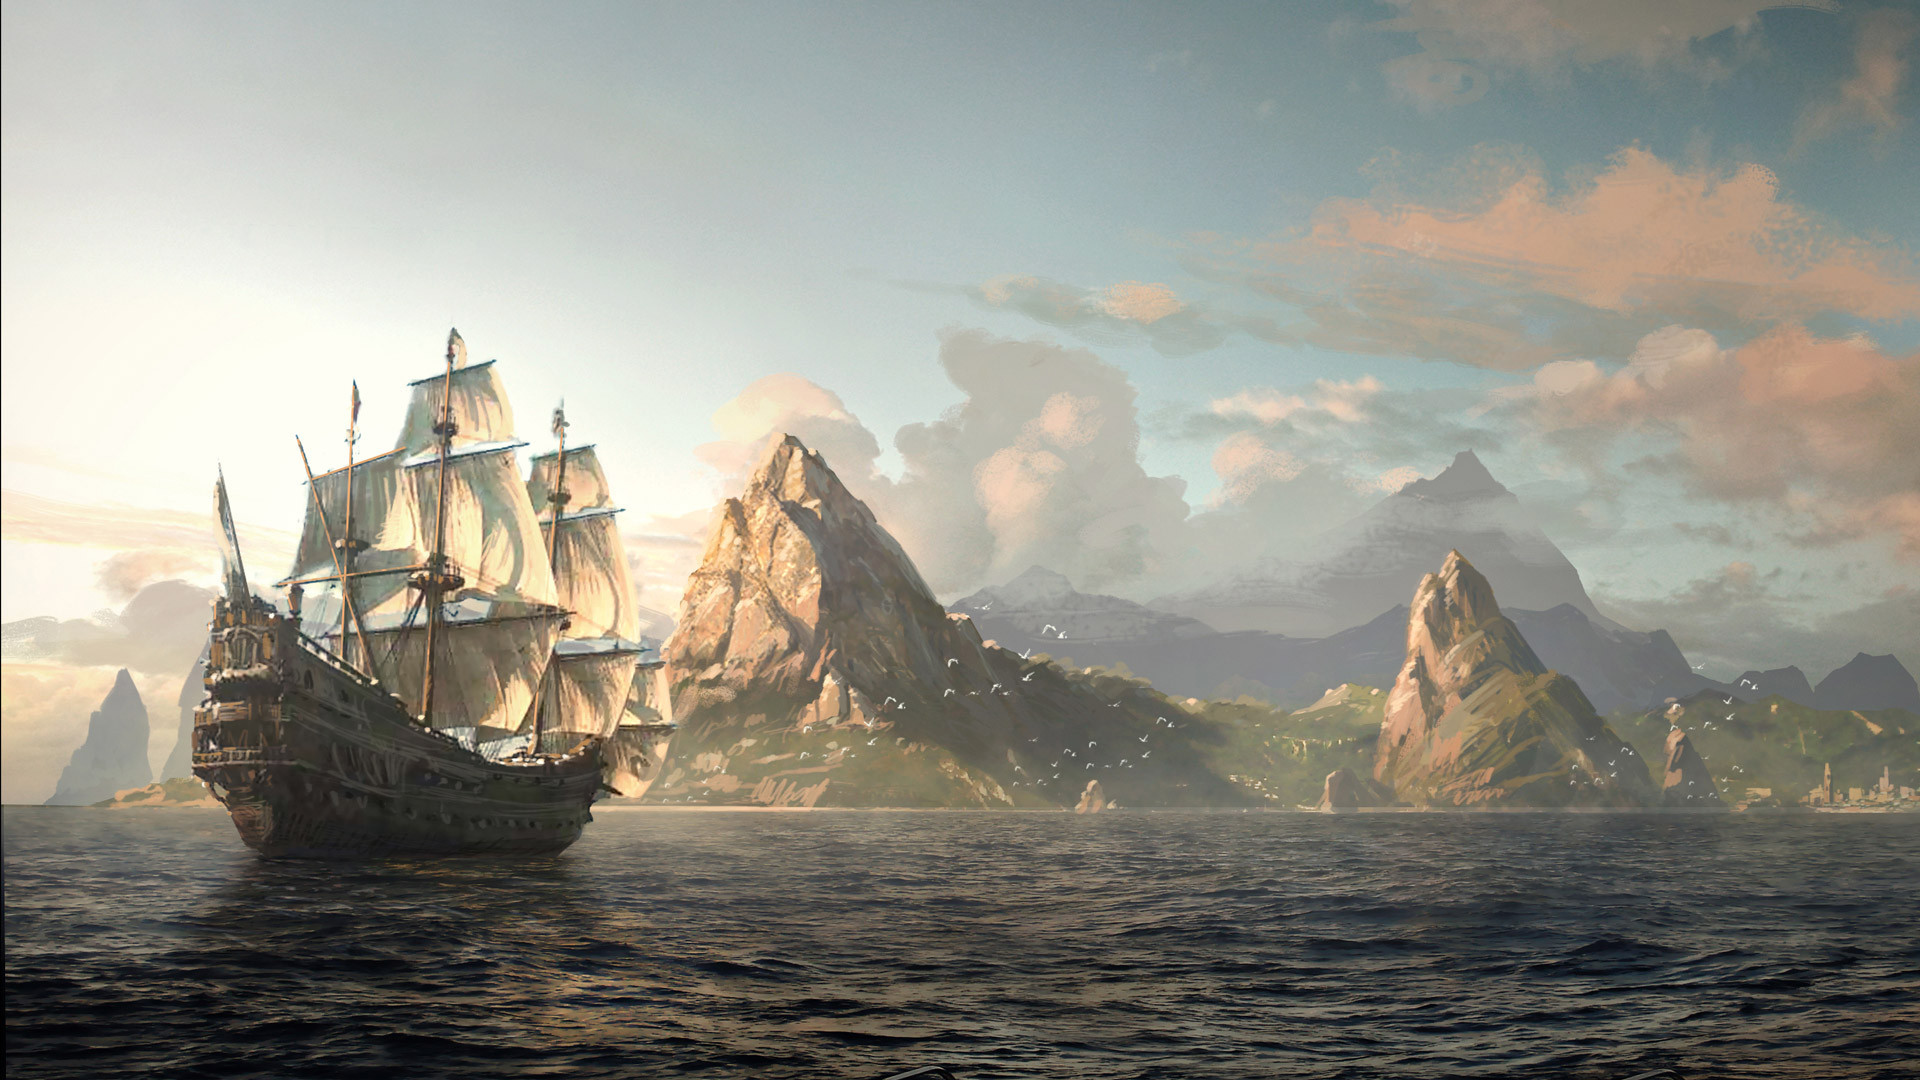 1920x1080 cinemagorgeous: “ Incredibly gorgeous concept art for Assassin's Creed IV:  Black Flag by artist Raphael Lacoste.